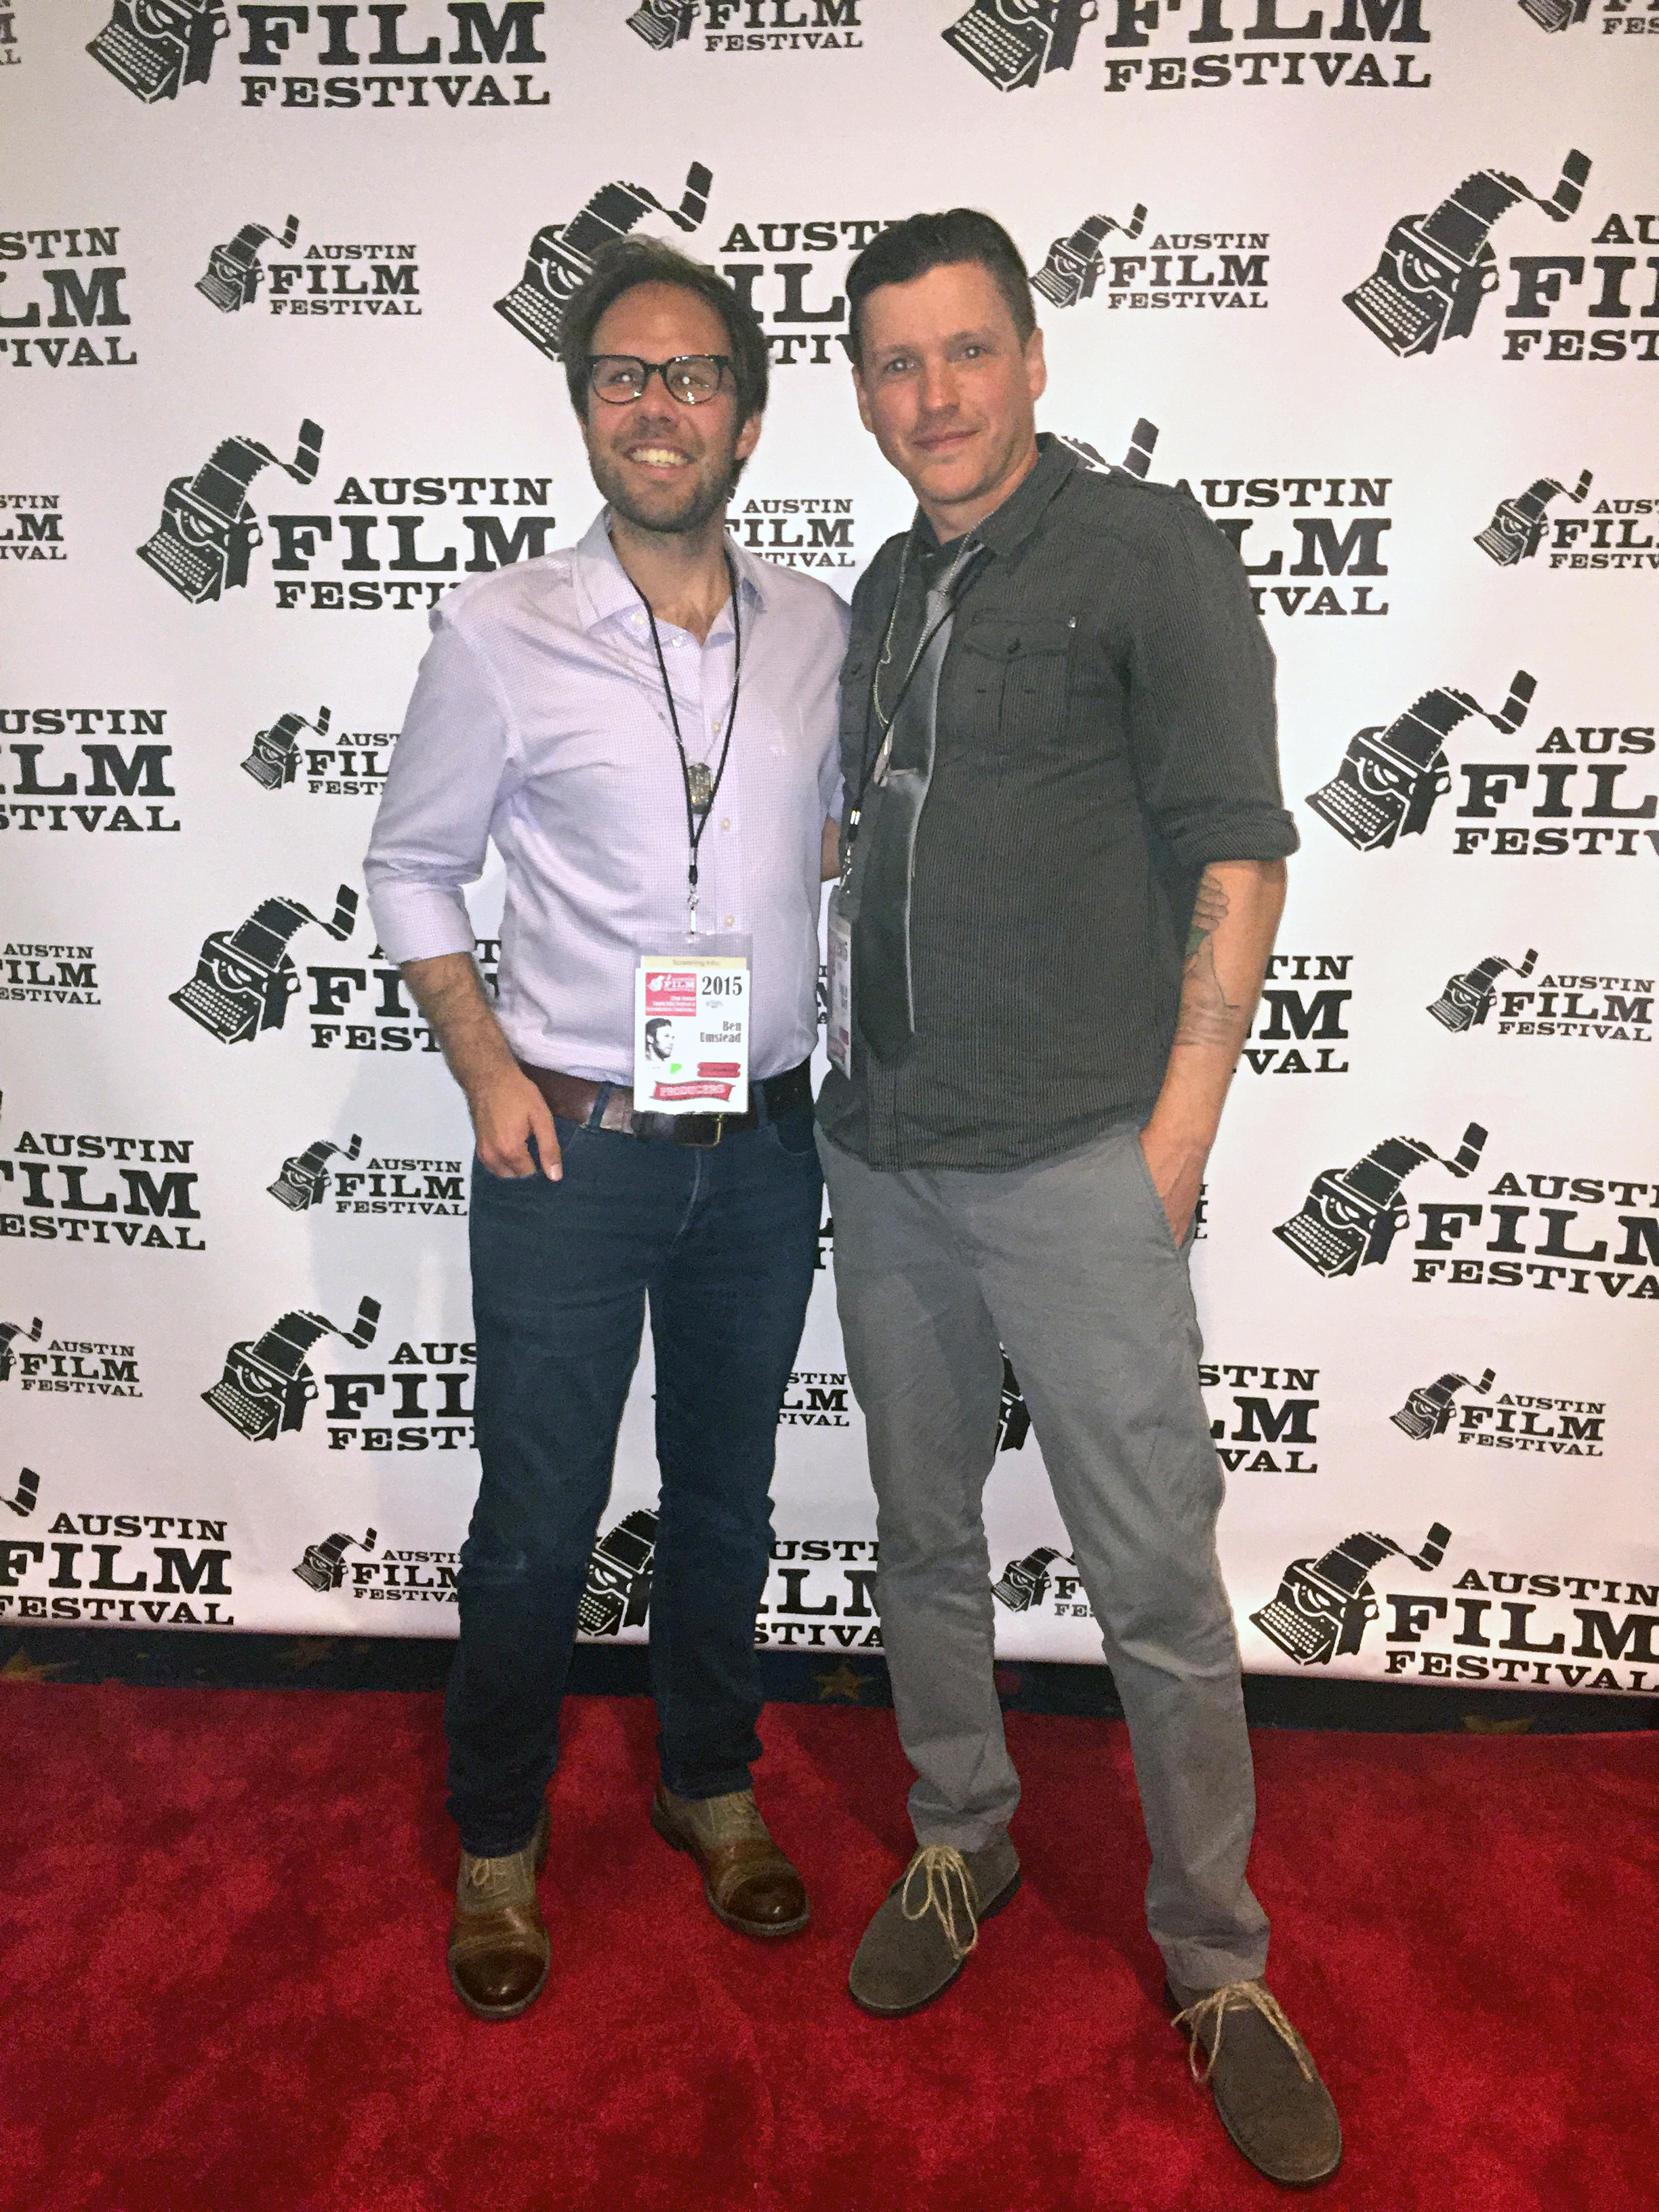 Producer Ben Umstead & writer/director Paul D. Hart of Three Fingers at Austin Film Festival